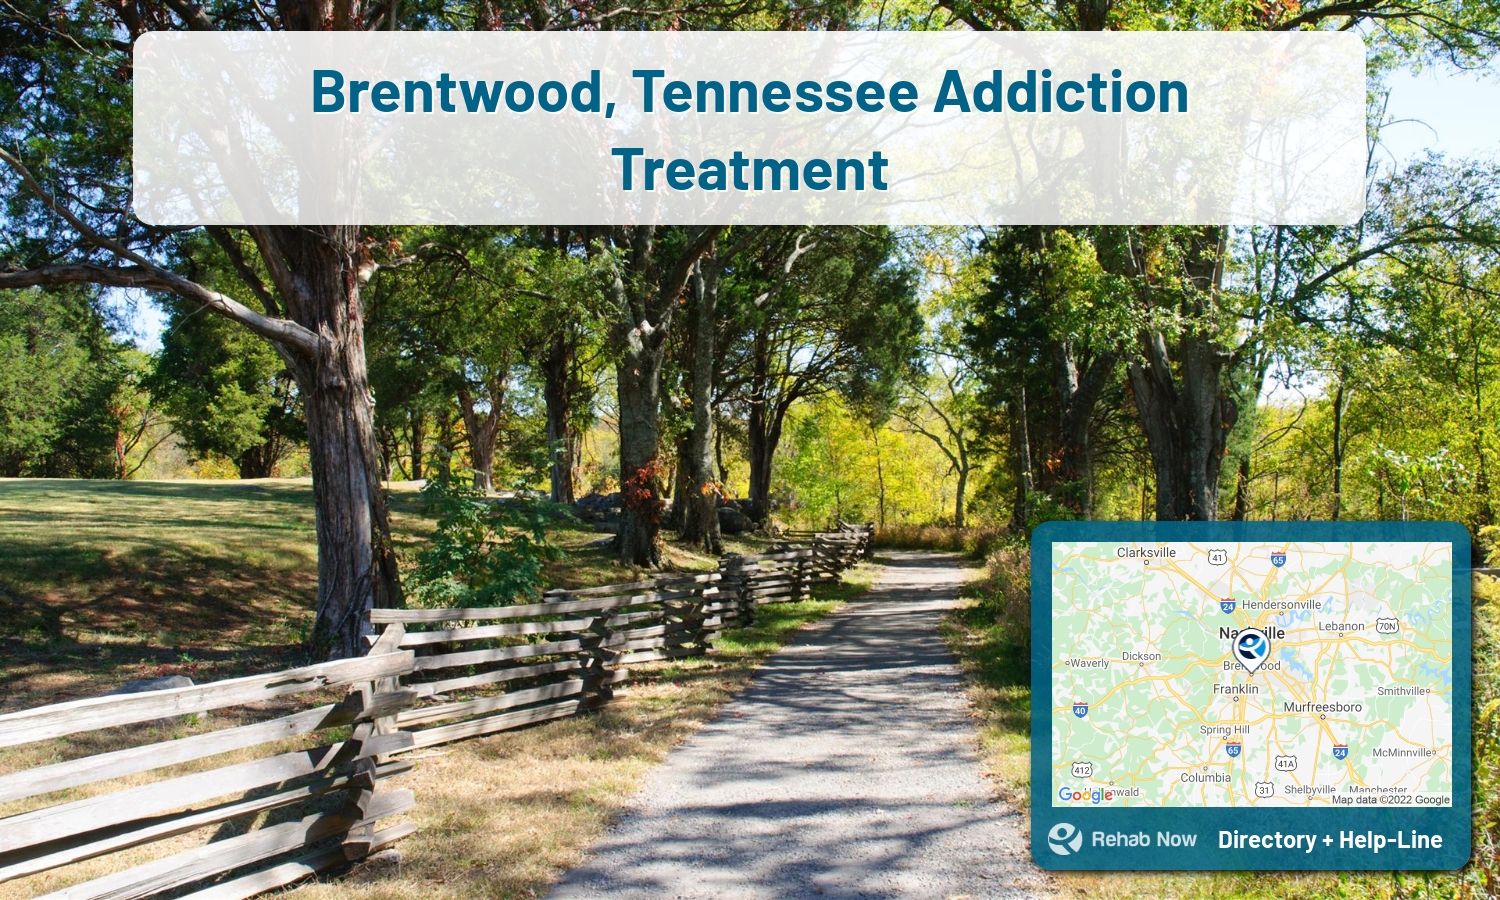 Brentwood, TN Treatment Centers. Find drug rehab in Brentwood, Tennessee, or detox and treatment programs. Get the right help now!